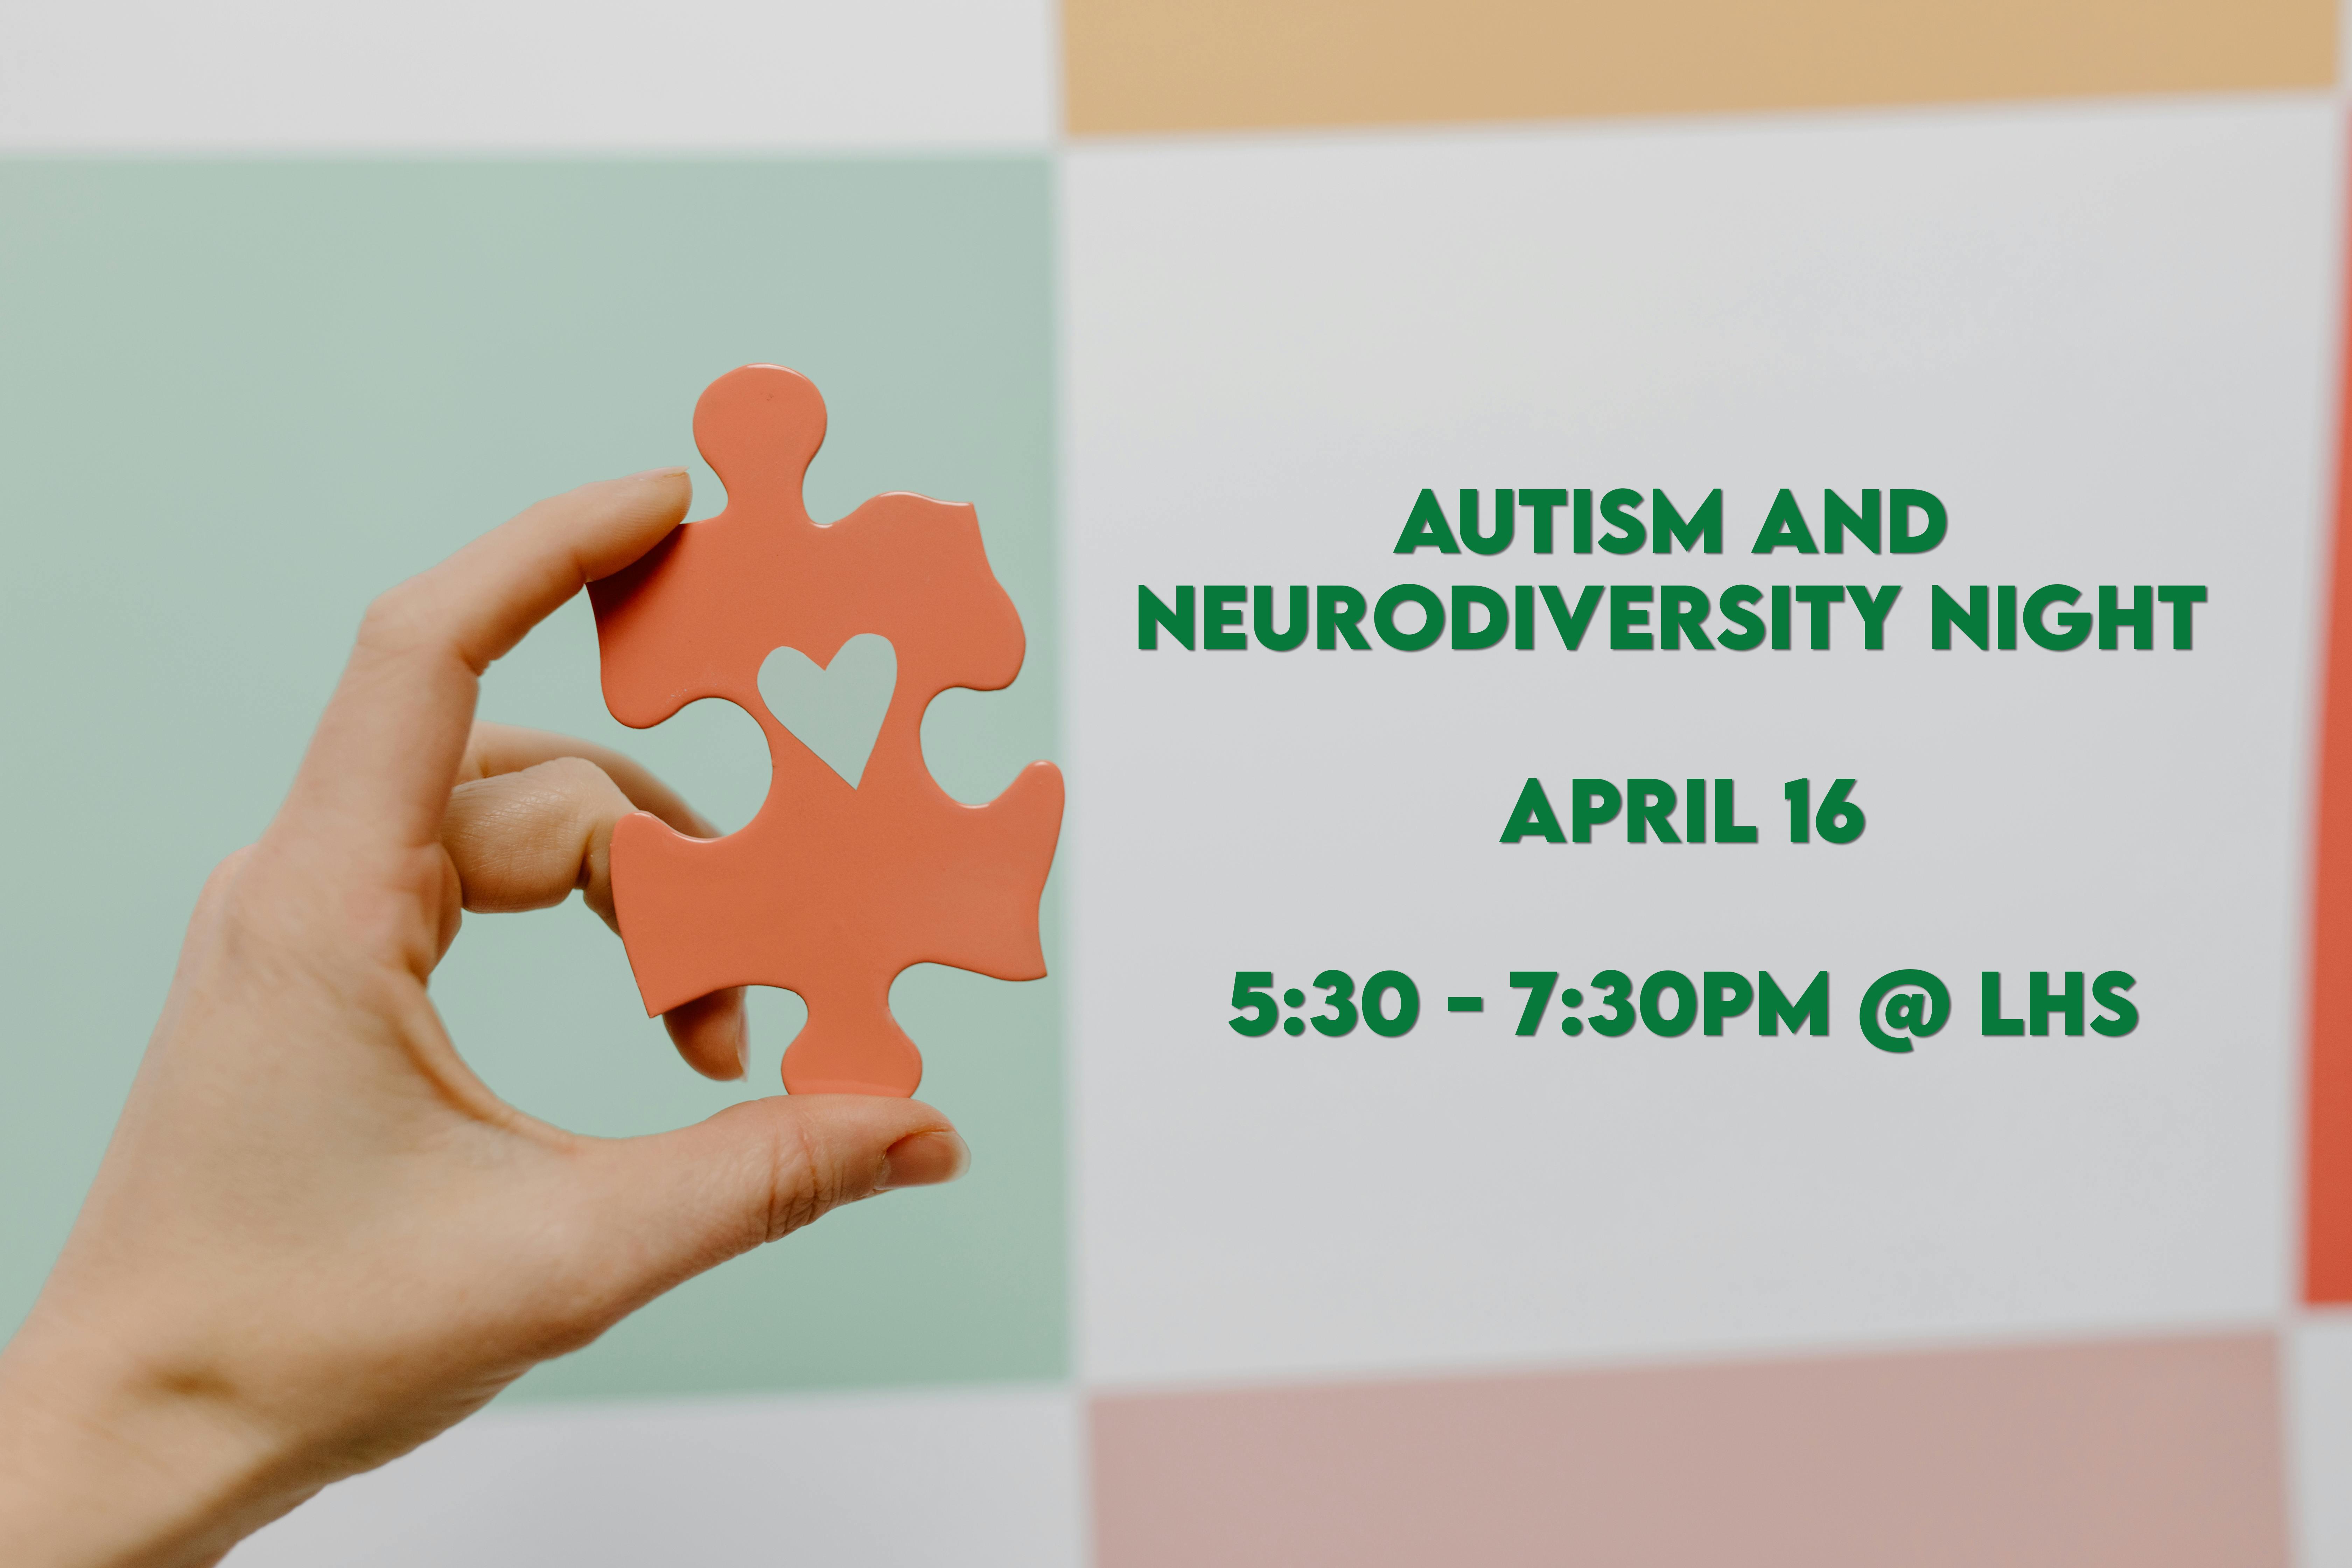 Autism and neurodiversity night April 16 from 5:30 to 7:30 pm at LHS